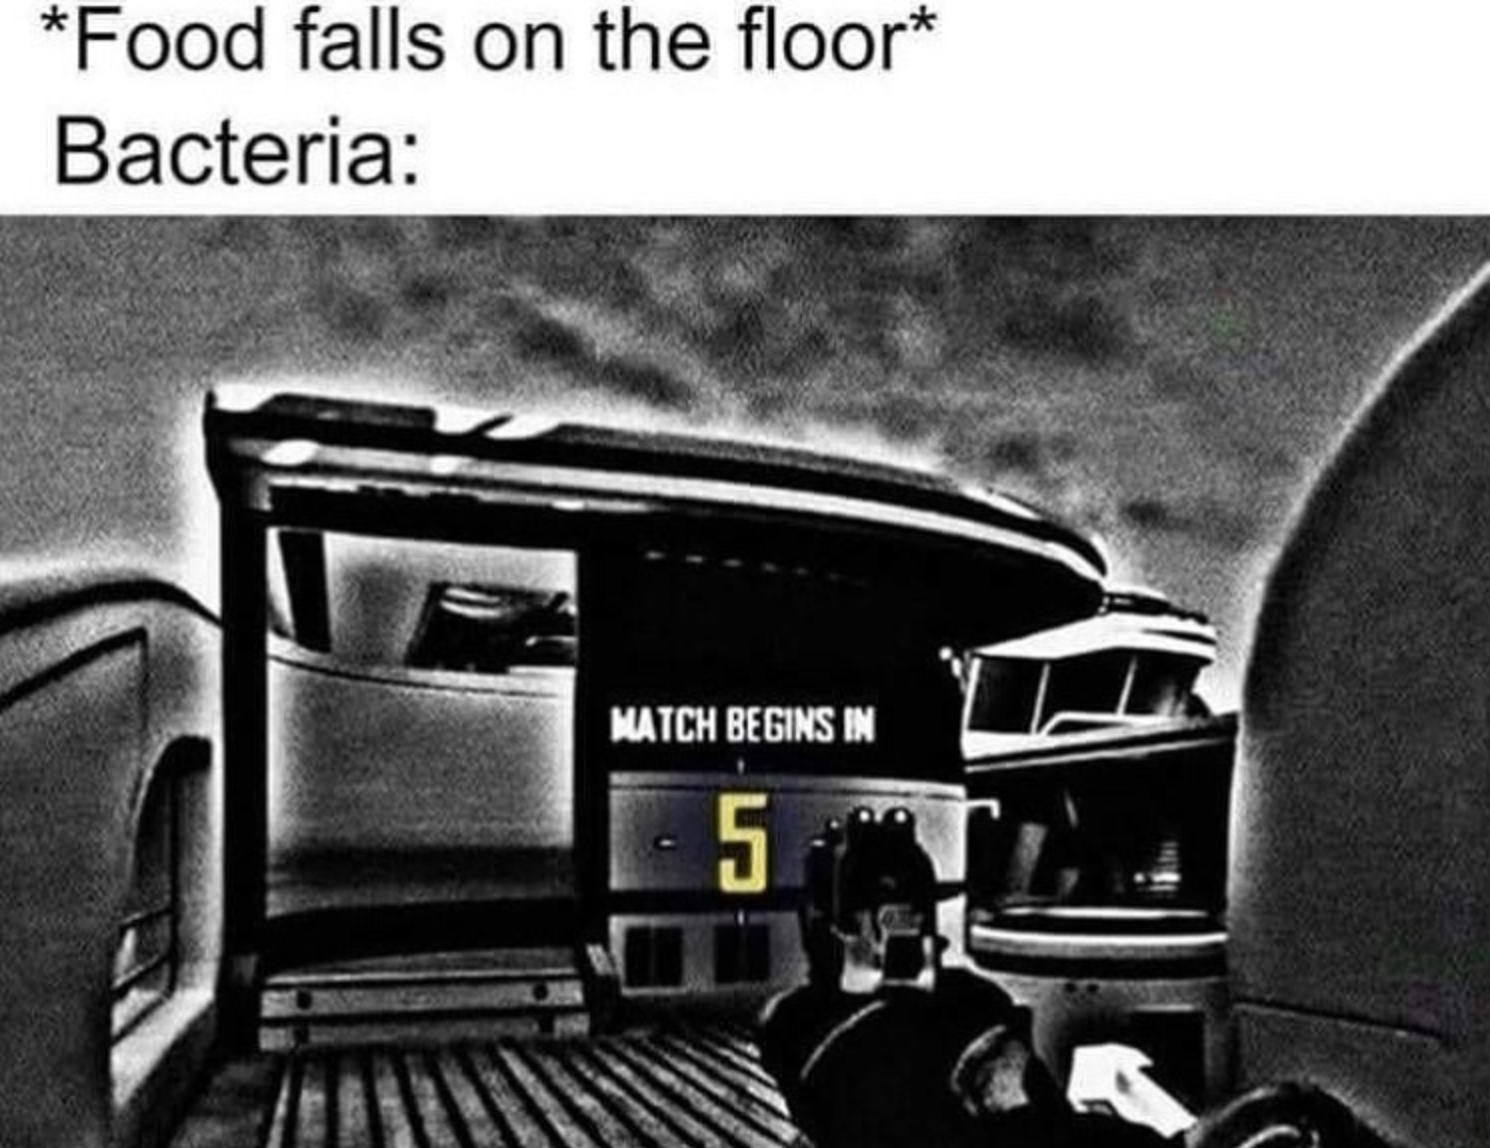 funny gaming memes - Food falls on the floor Bacteria Match Begins In 5